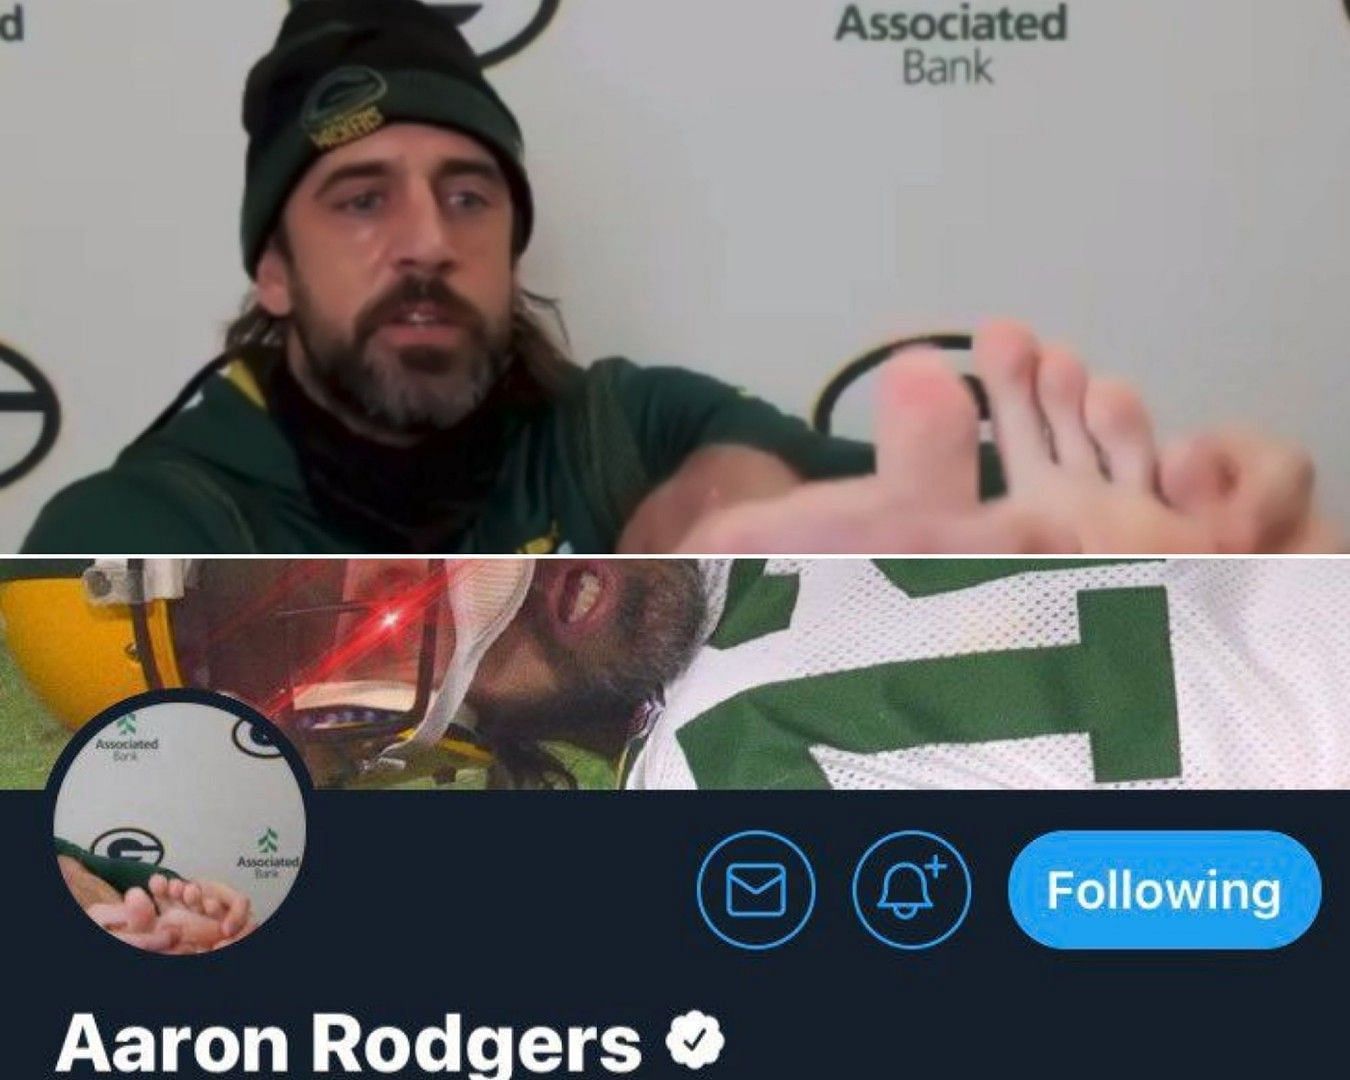 Rodgers shows his toe and then changes his display picture